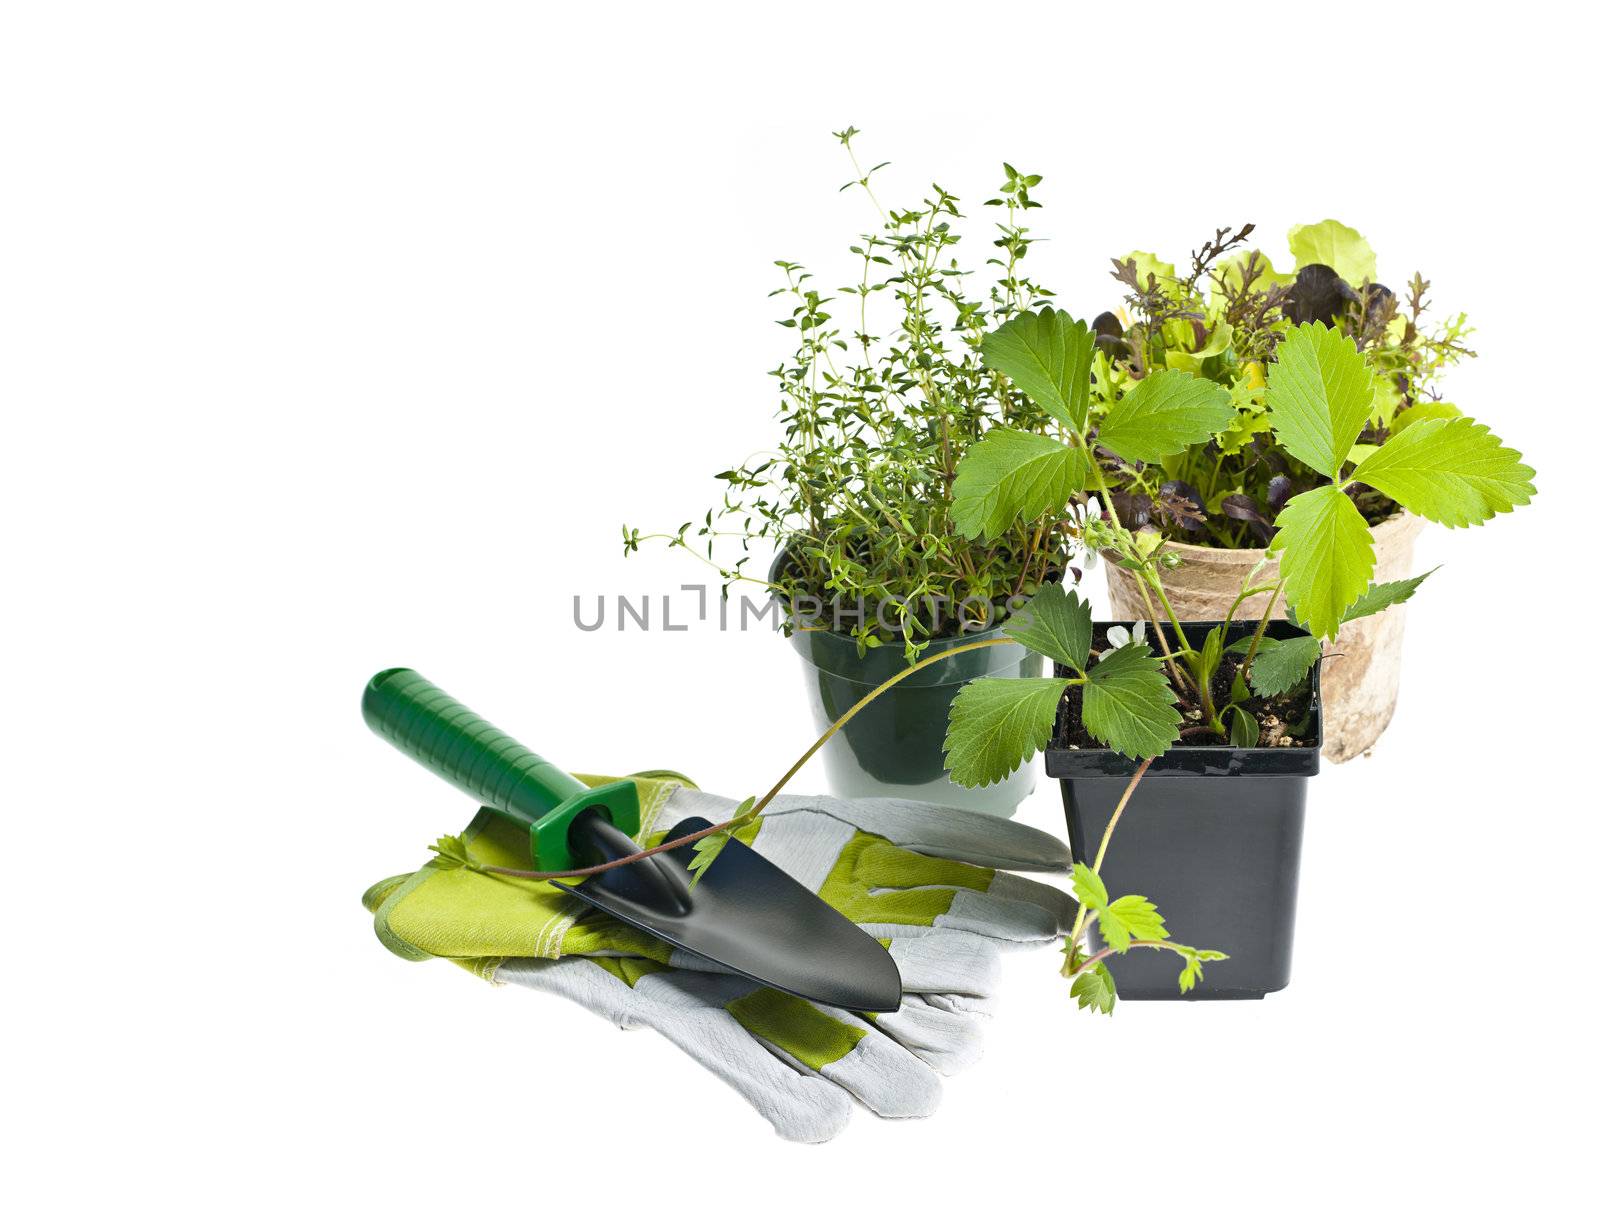 Plants and seedlings in pots with gardening tools isolated on white